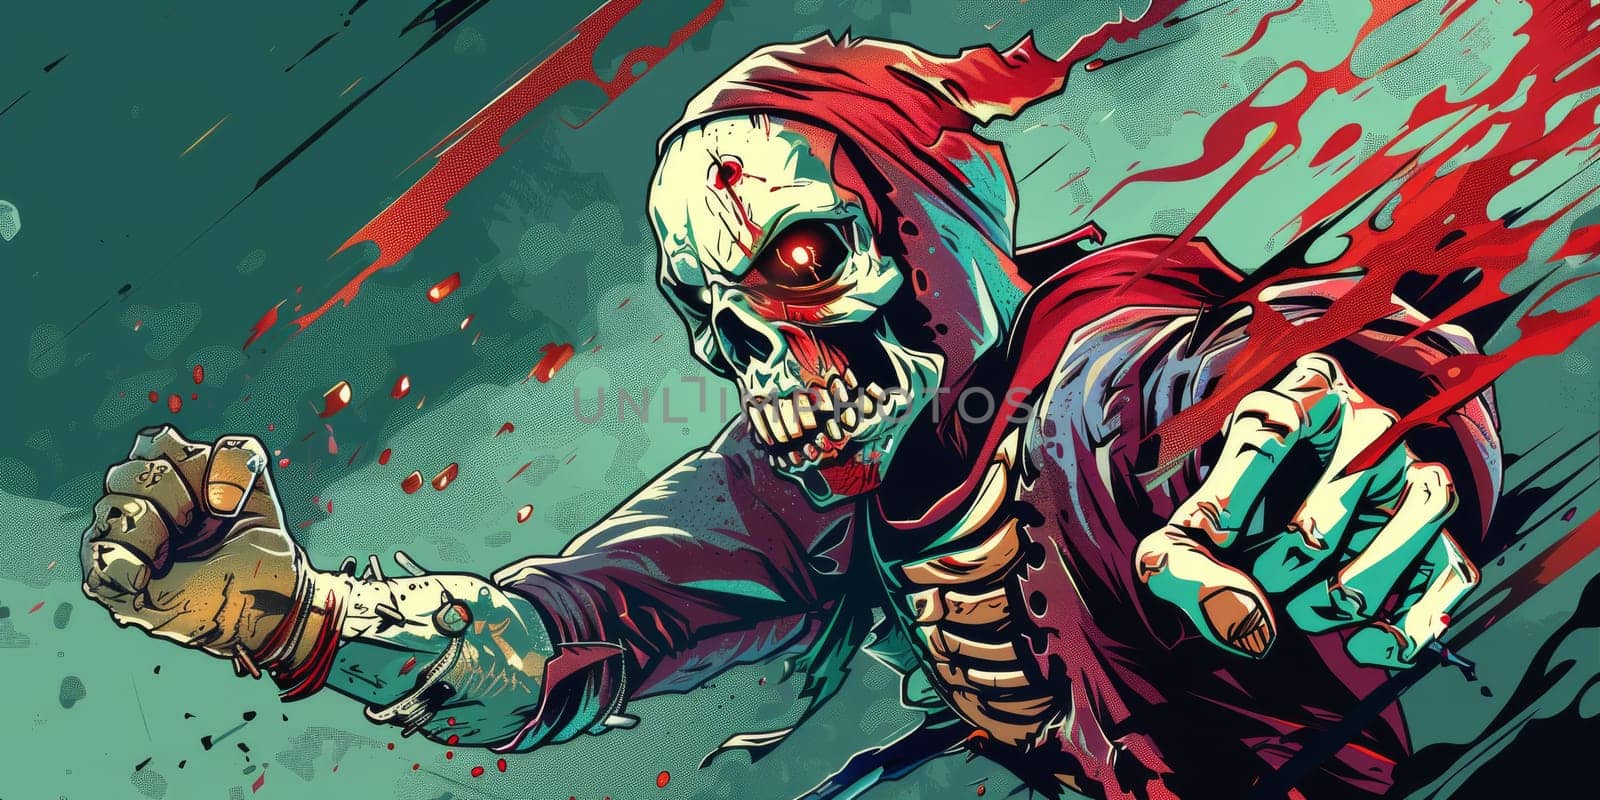 Rush, creepy, hooded skeleton, death punch concept by Kadula